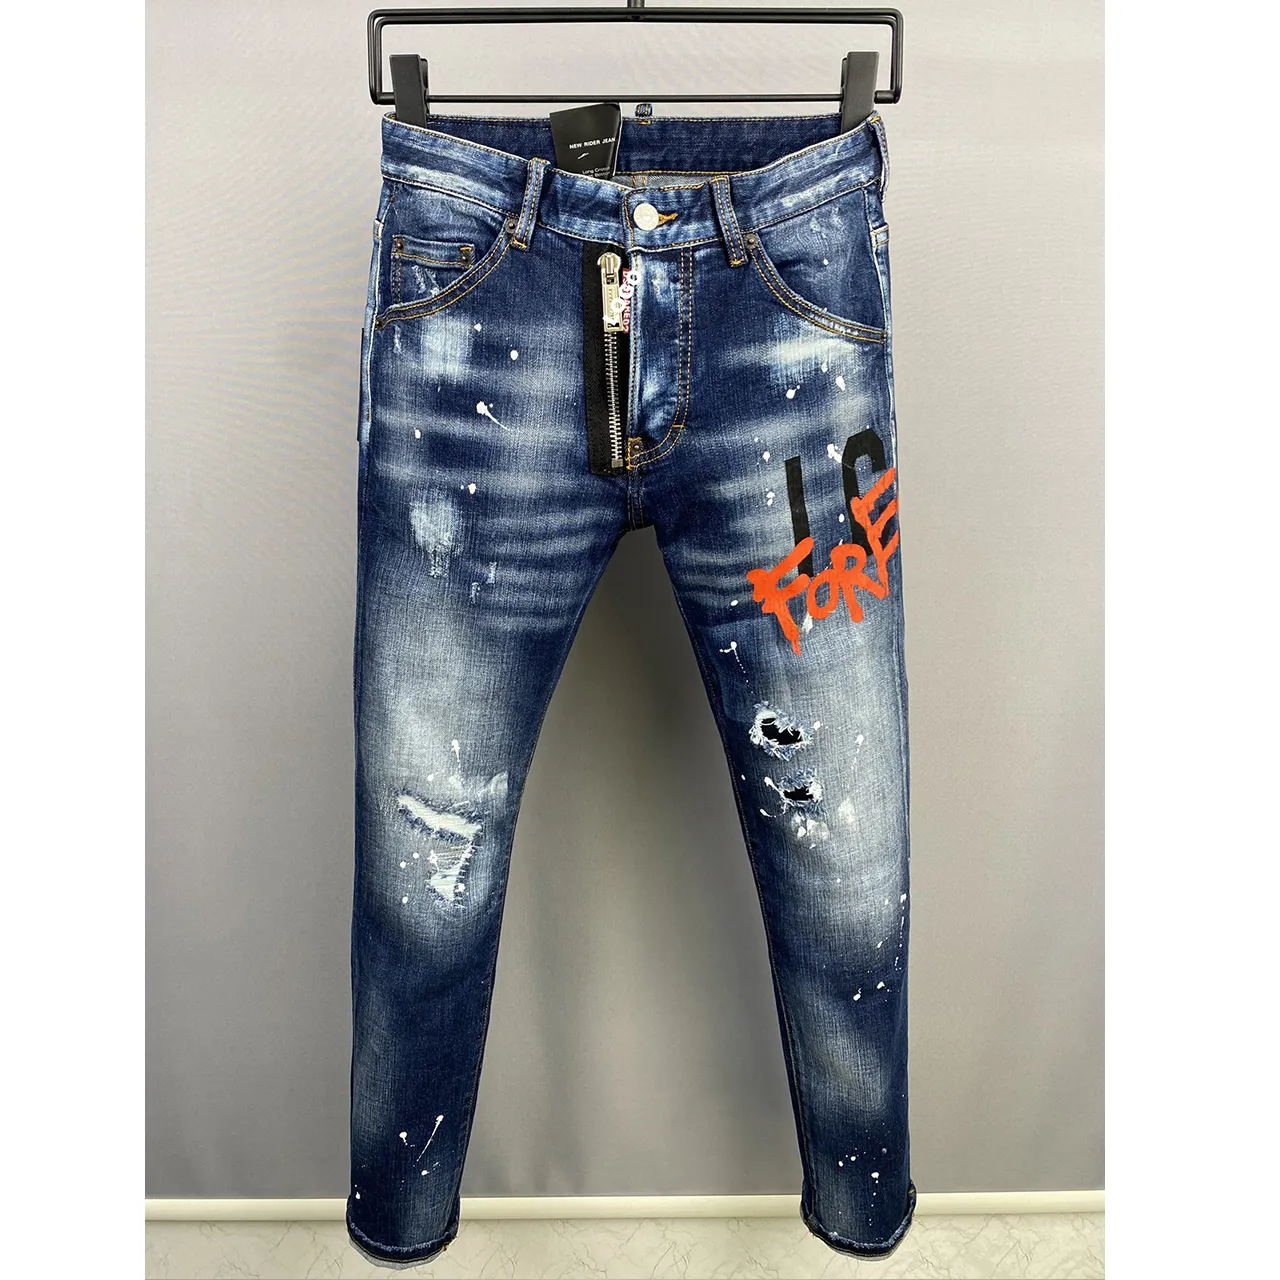 2023 Spring And Summer New D2 Jeans Fashion Men Wash Printing Paint Splashing Fashion Casual Small Straight Jeans Men